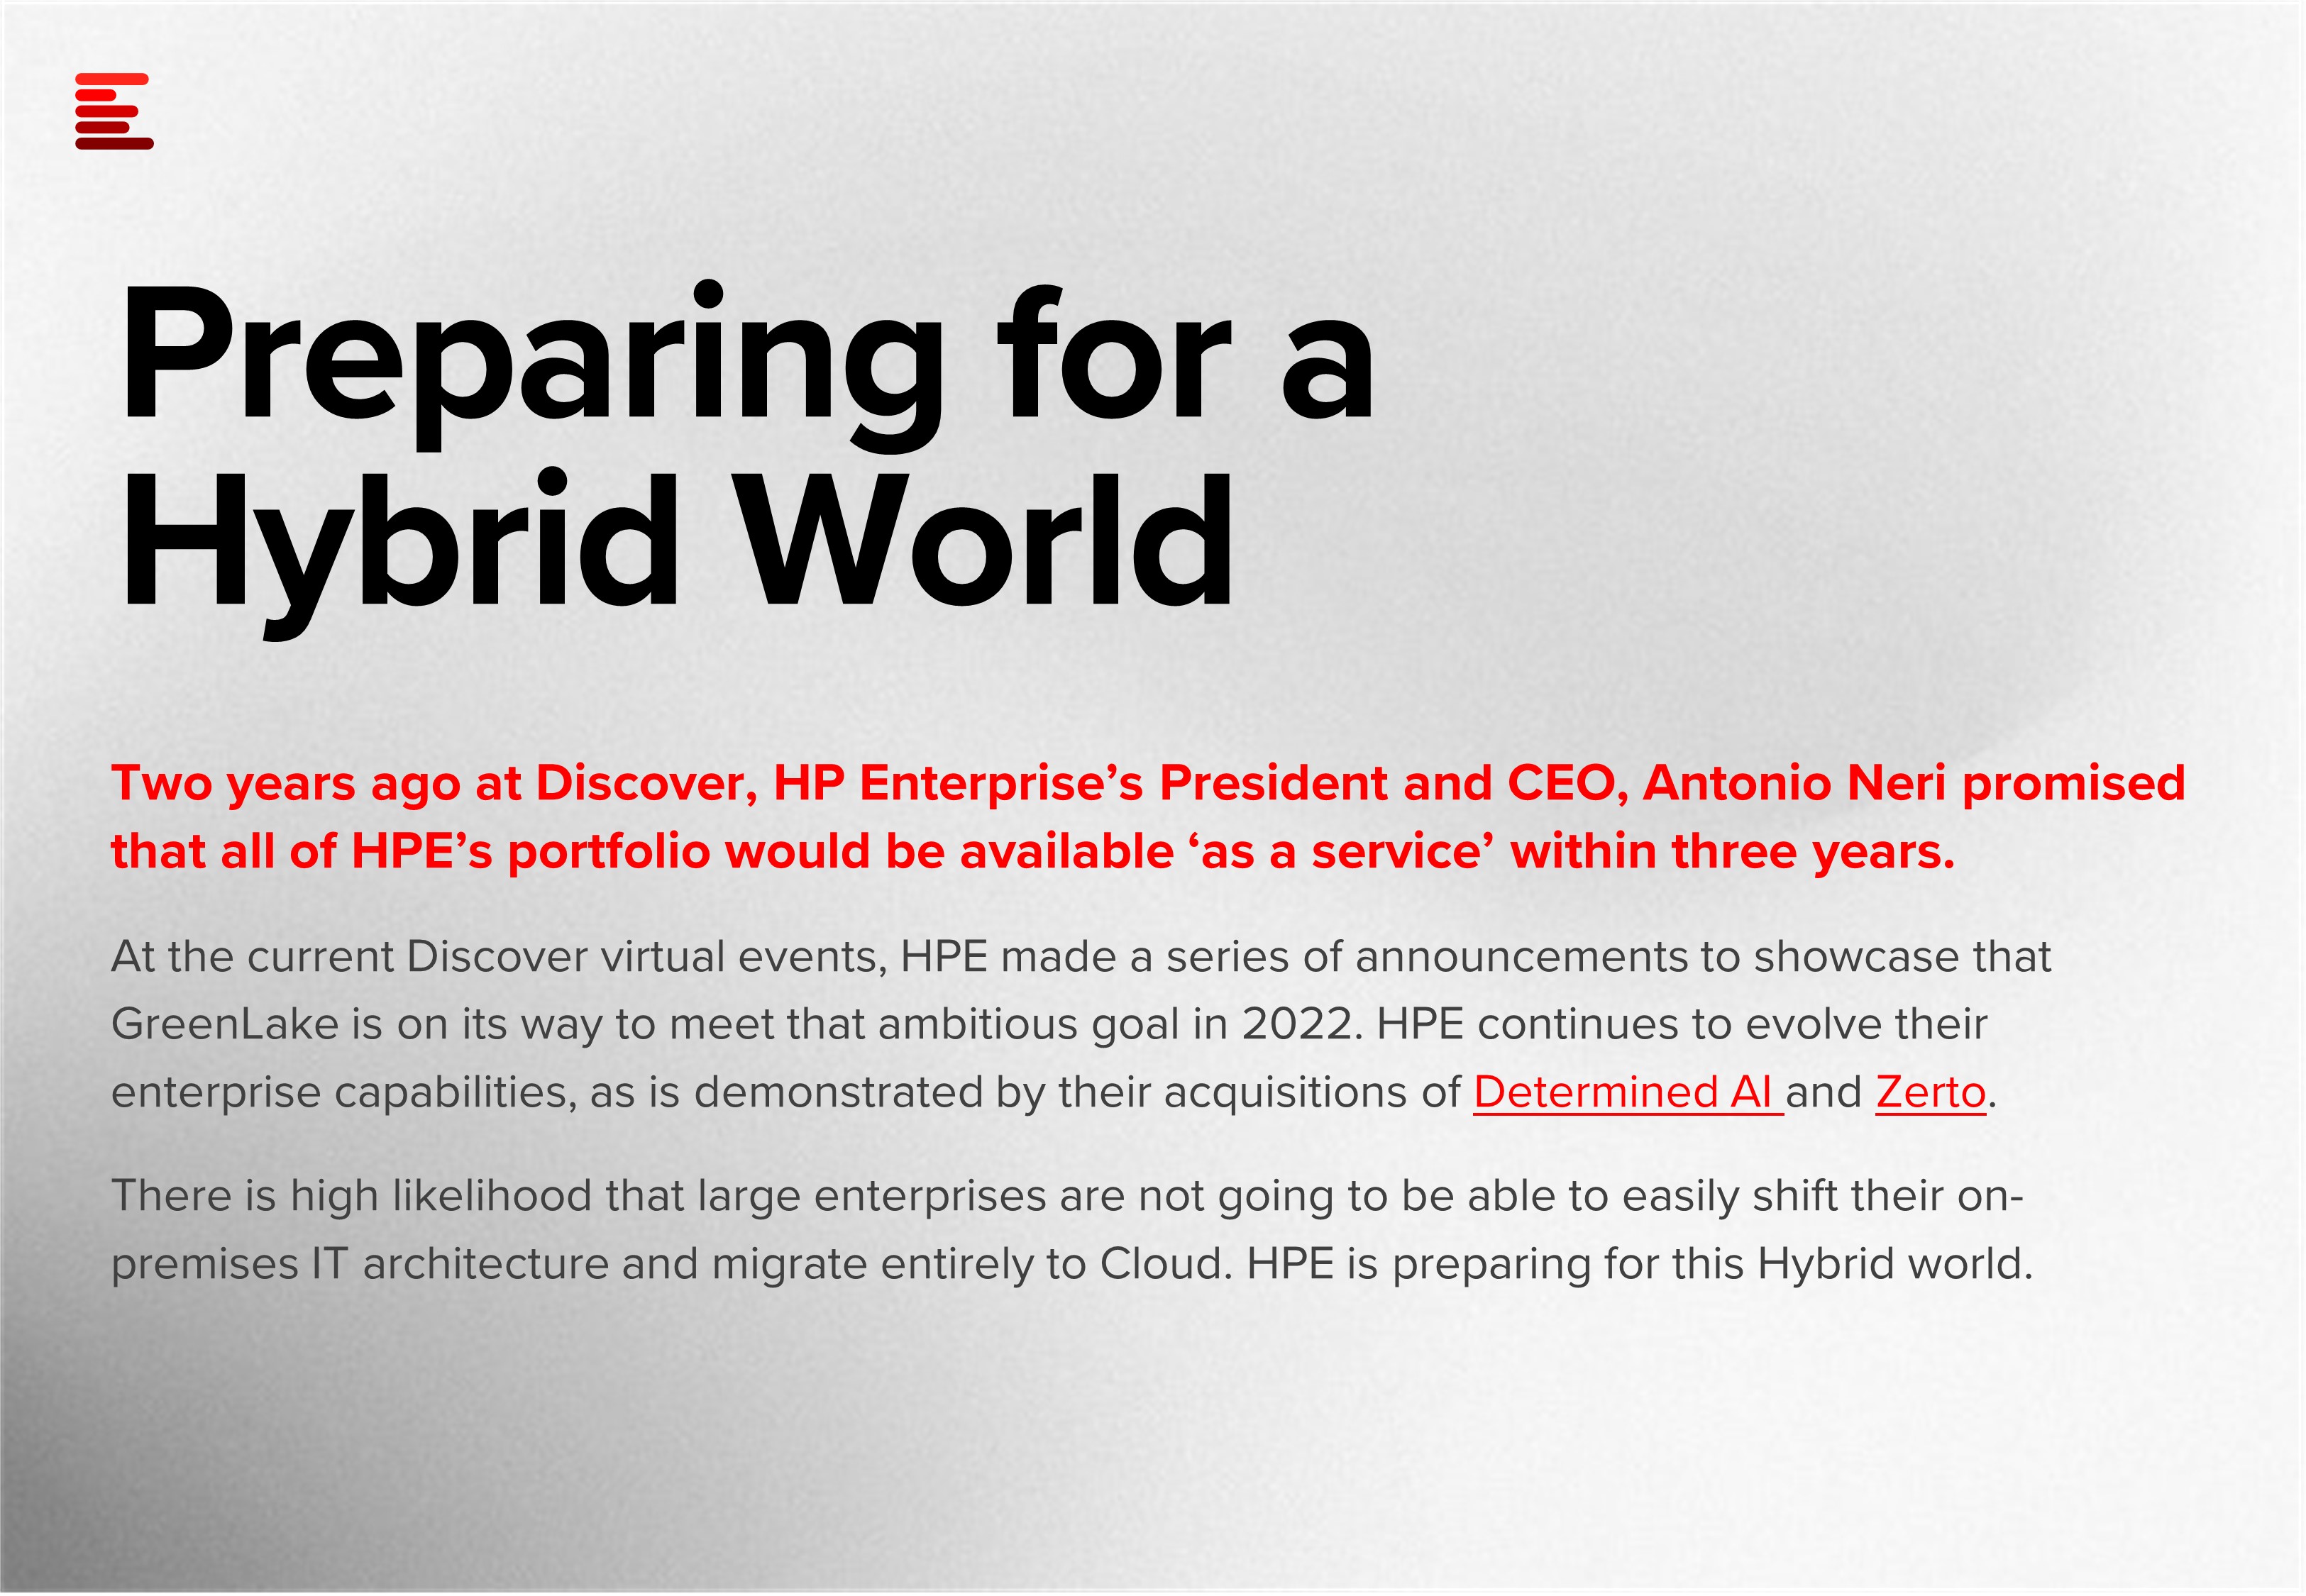 Ecosystm-VendorSphere-HPE-DISCOVER-Edge-to-cloud-roadmap-2